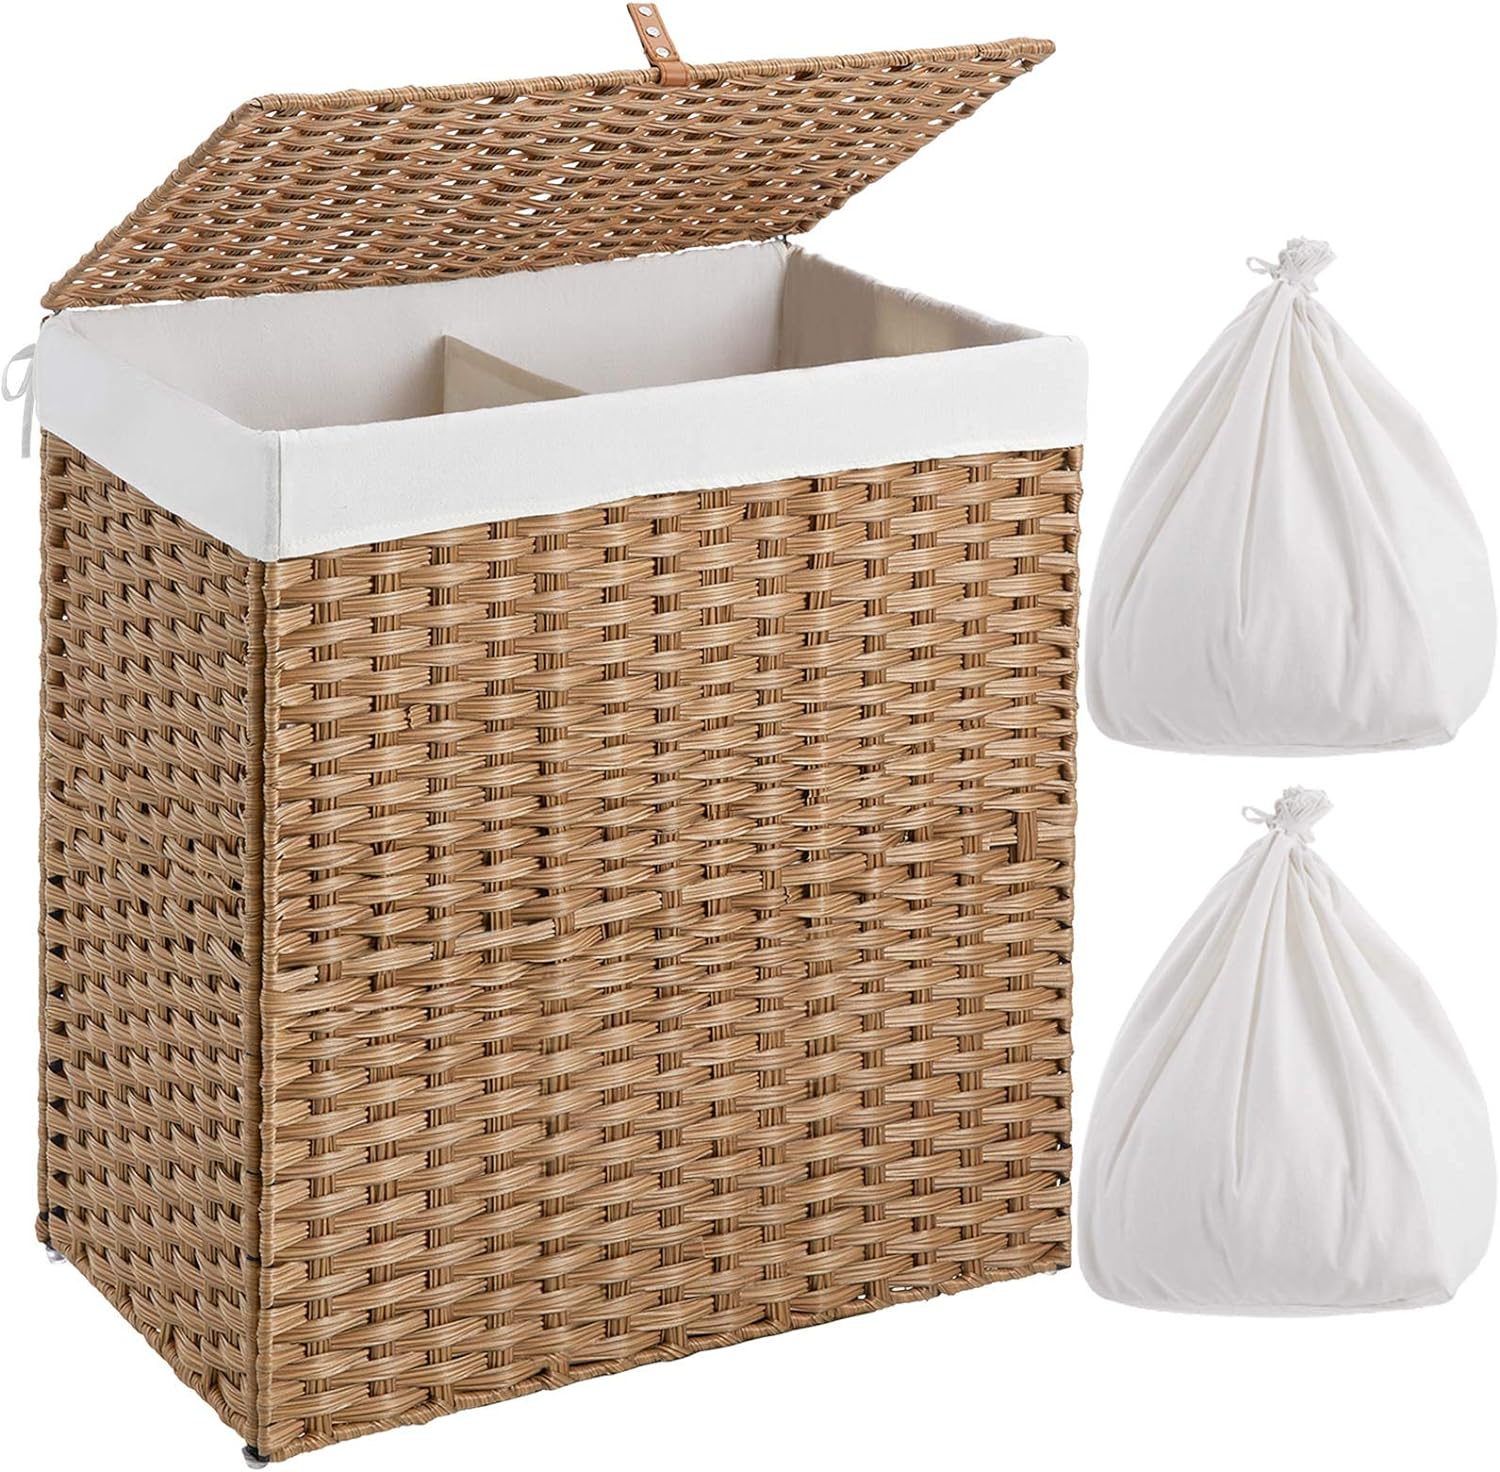 Greenstell Laundry Hamper with lid, No Install Needed, 110L Wicker Laundry Baskets Foldable 2 Removable Liner Bags, 2 Section Clothes Hamper Handwoven Rattan Laundry Basket with Handles, Natural